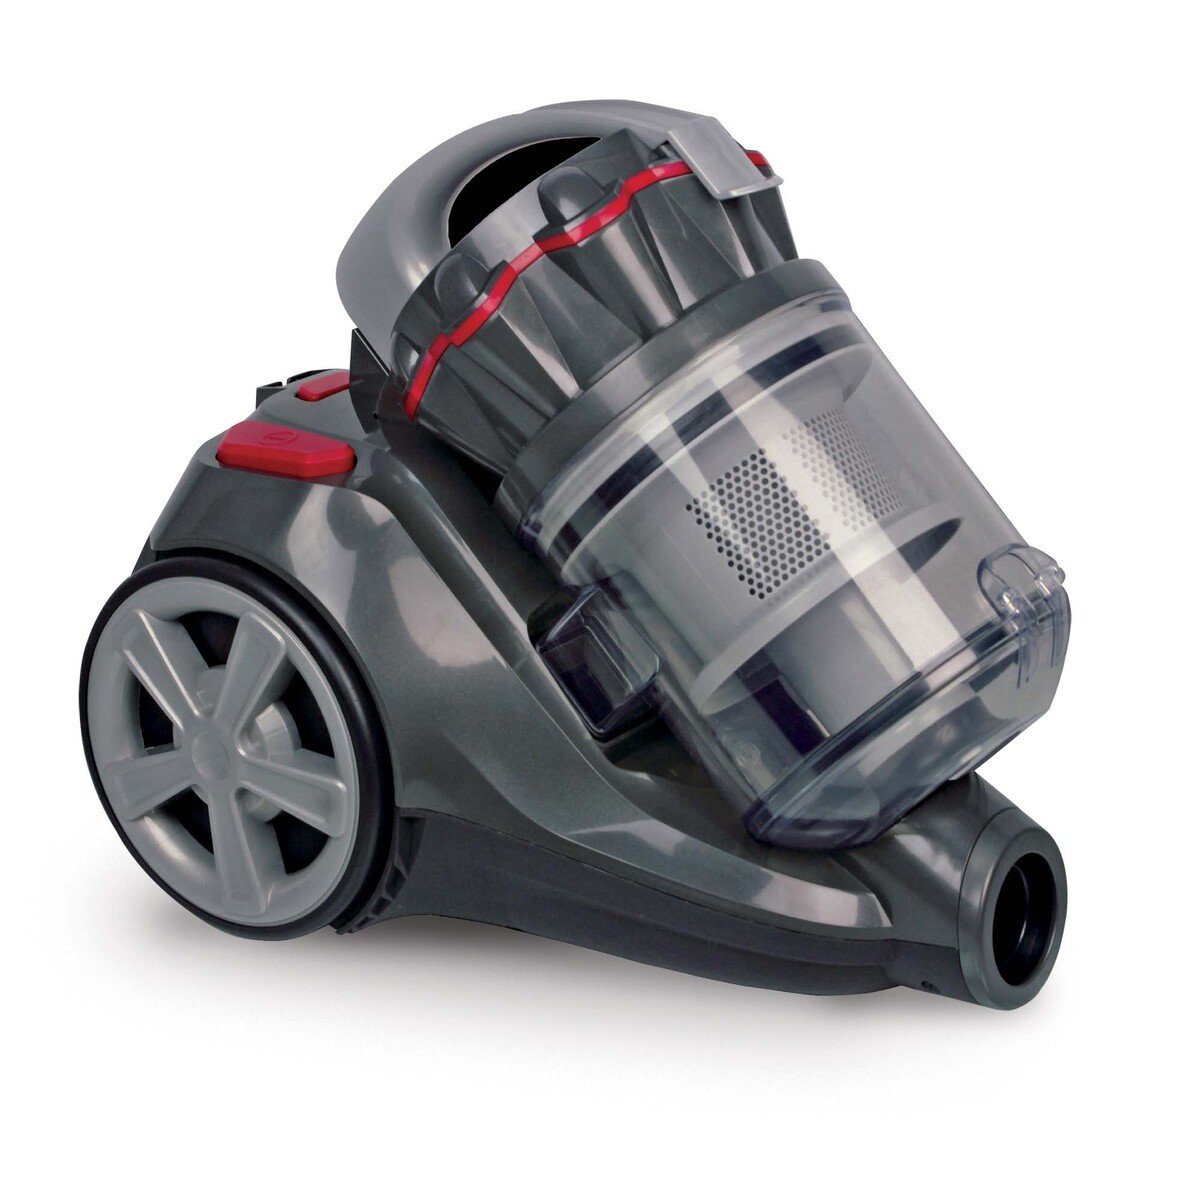 Ikon Cyclone Canister Vacuum Cleaner, 3 L, 2200 W, Black, BLV28